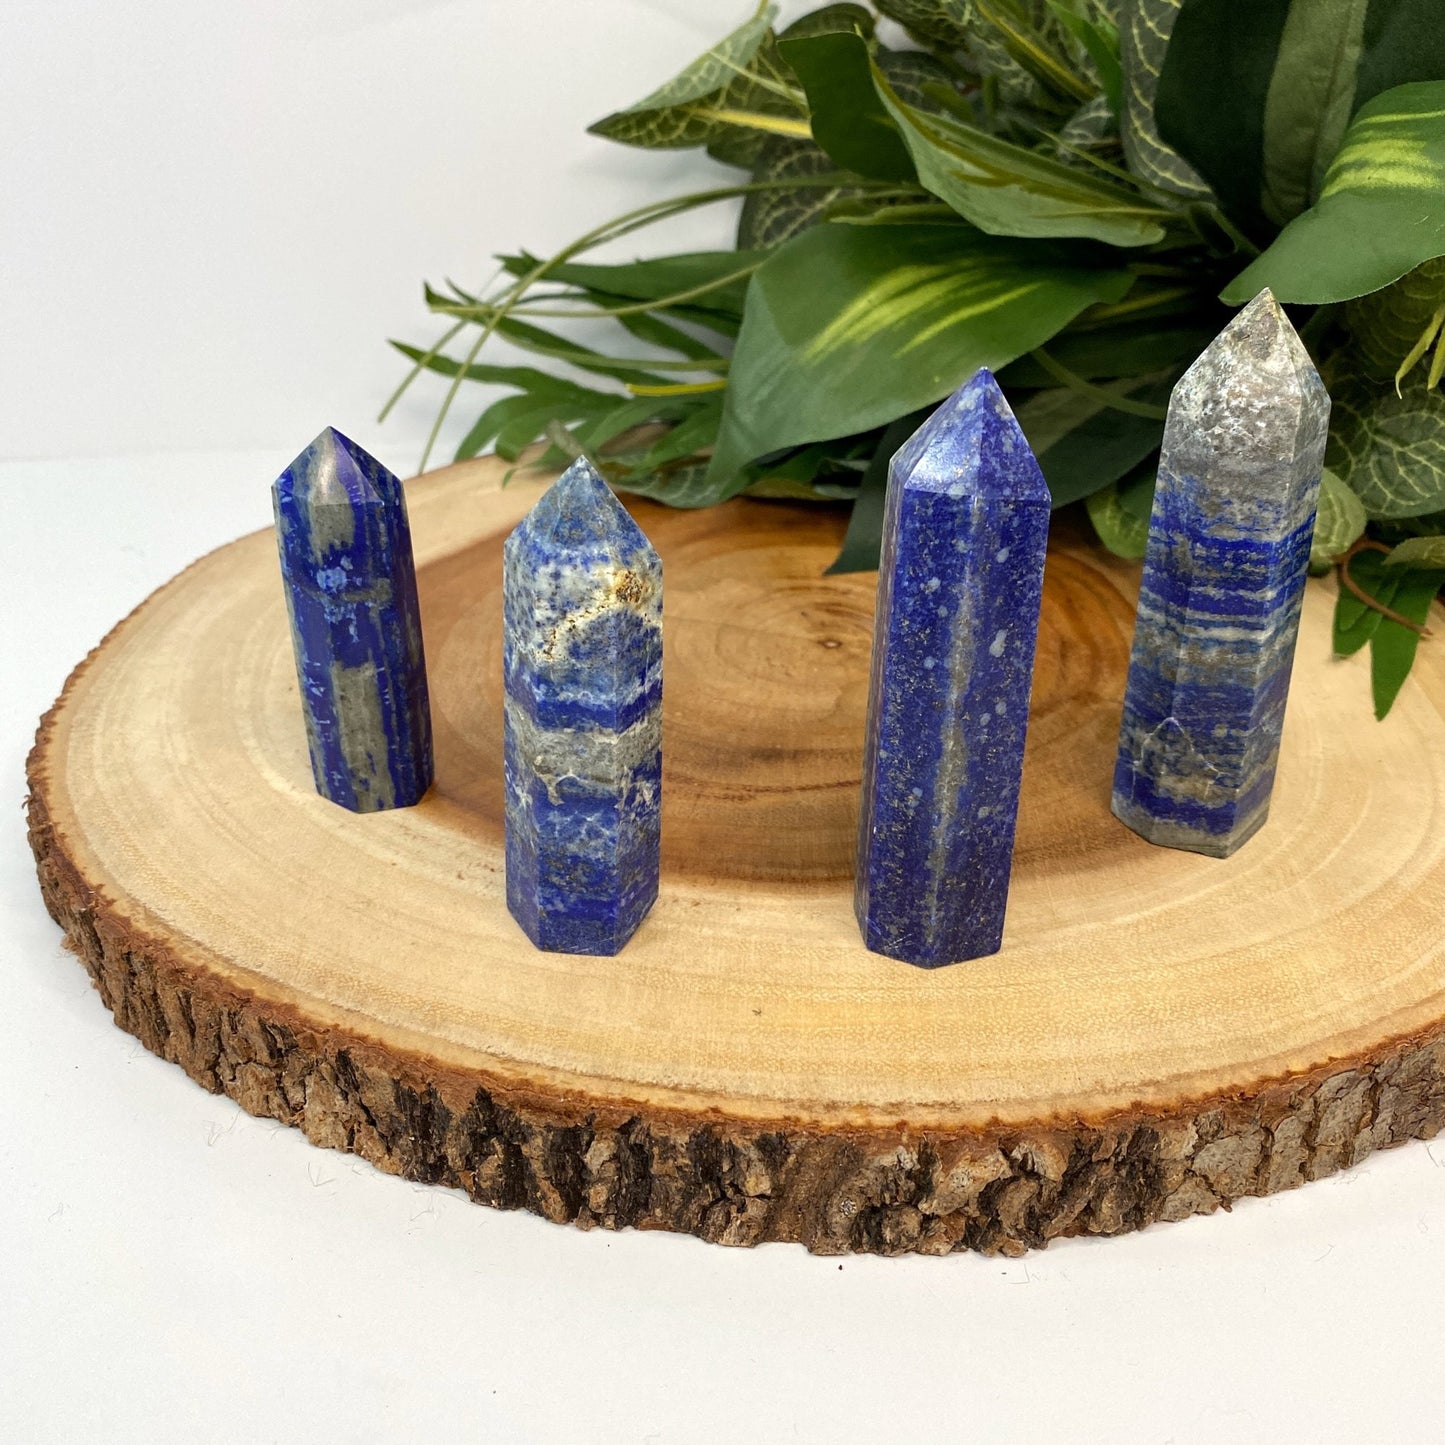 Natural Lapis Lazuli Tower Point from Pakistan - Blue Crystal for Meditation, Crystal Grids, Healing, Reiki Chakra, Altars, Wand